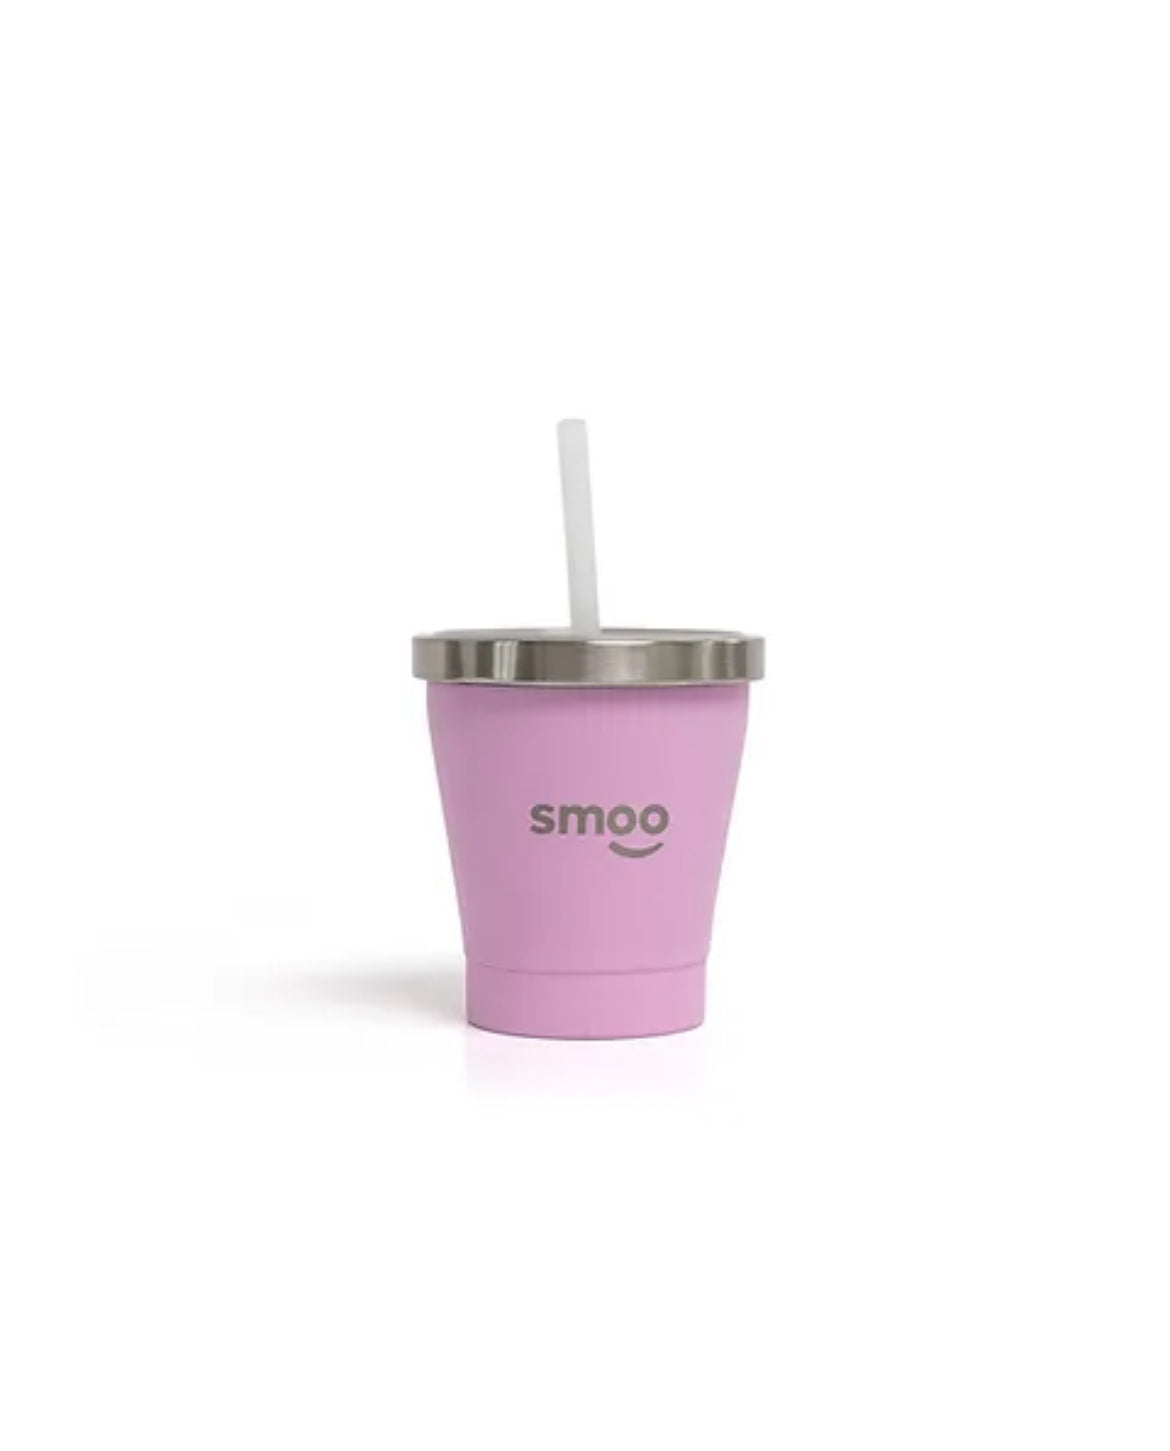 Smoo Pink Mini Smoothie Cup